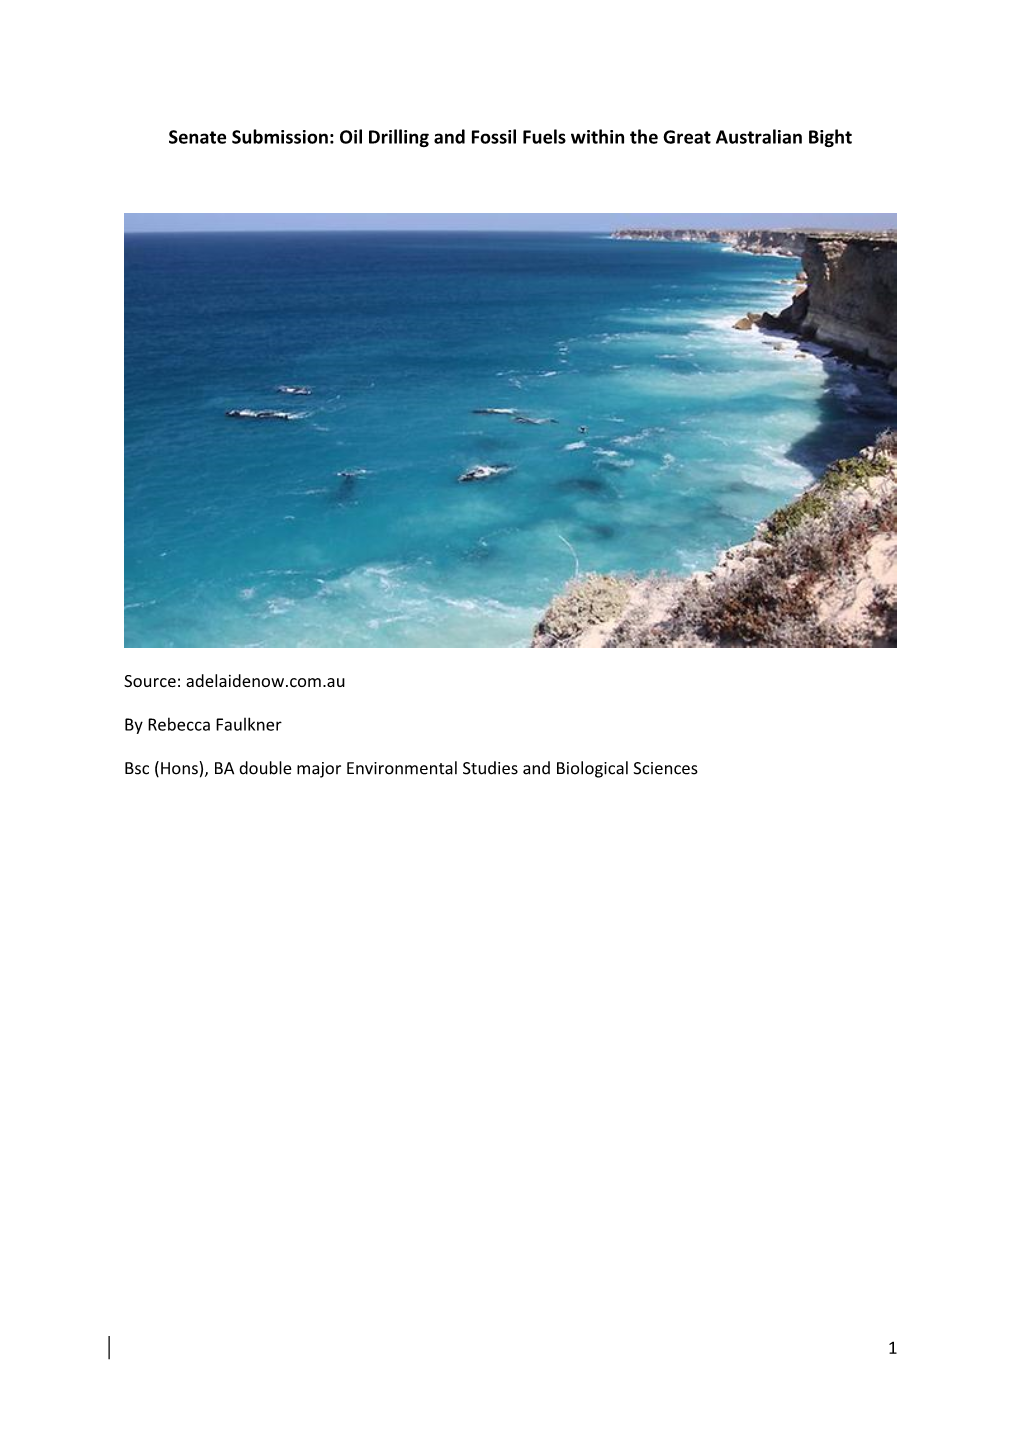 Oil Drilling and Fossil Fuels Within the Great Australian Bight